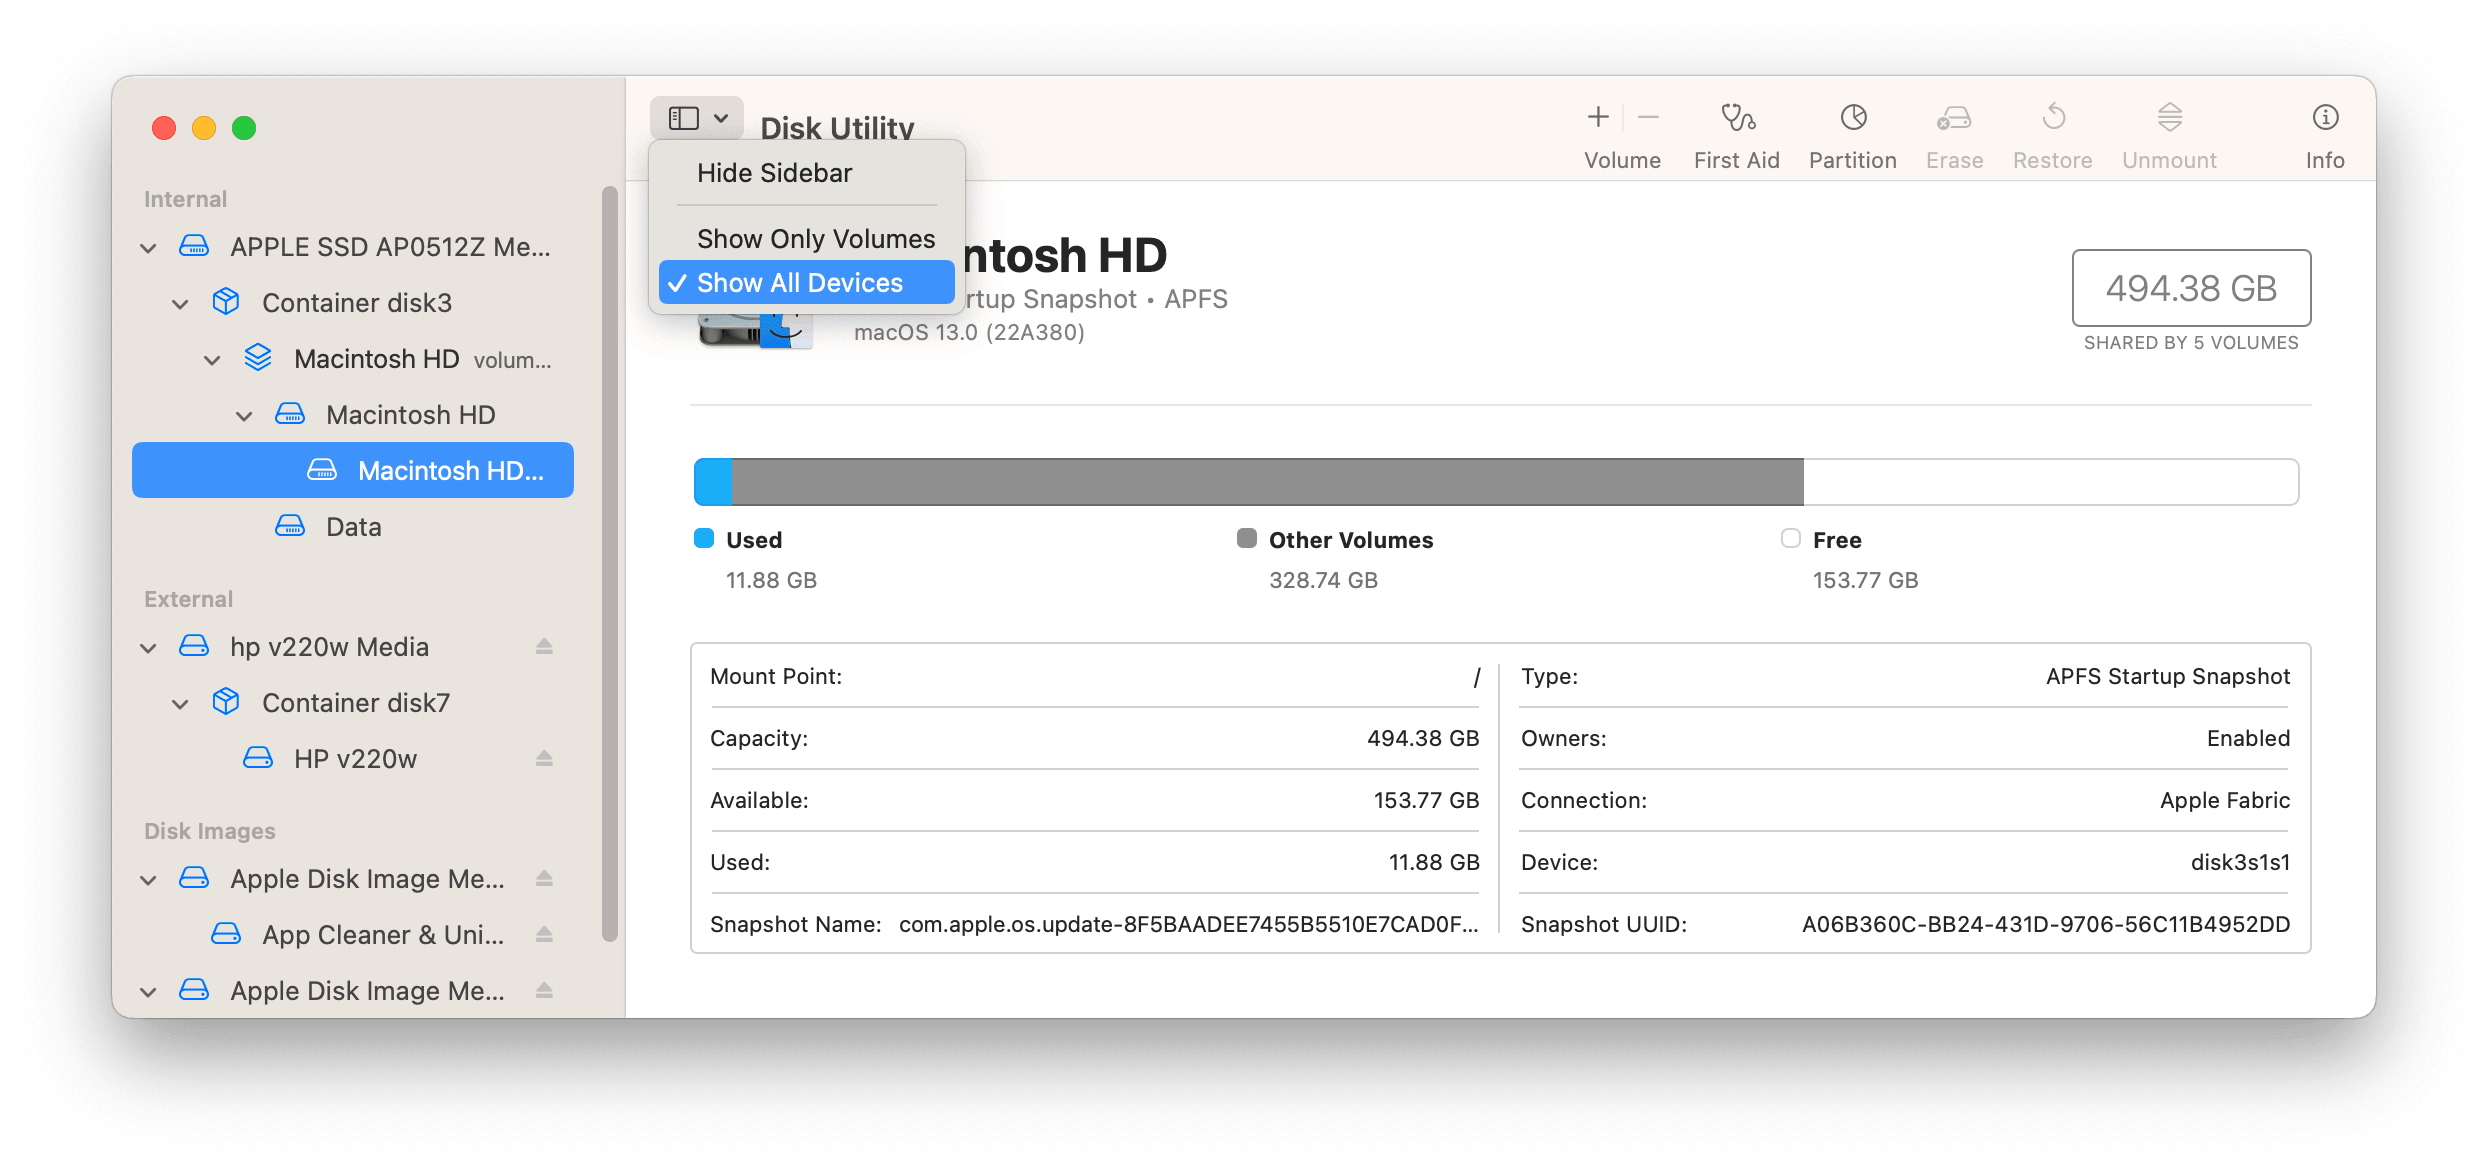 Show All Devices in Disk Utility on Mac